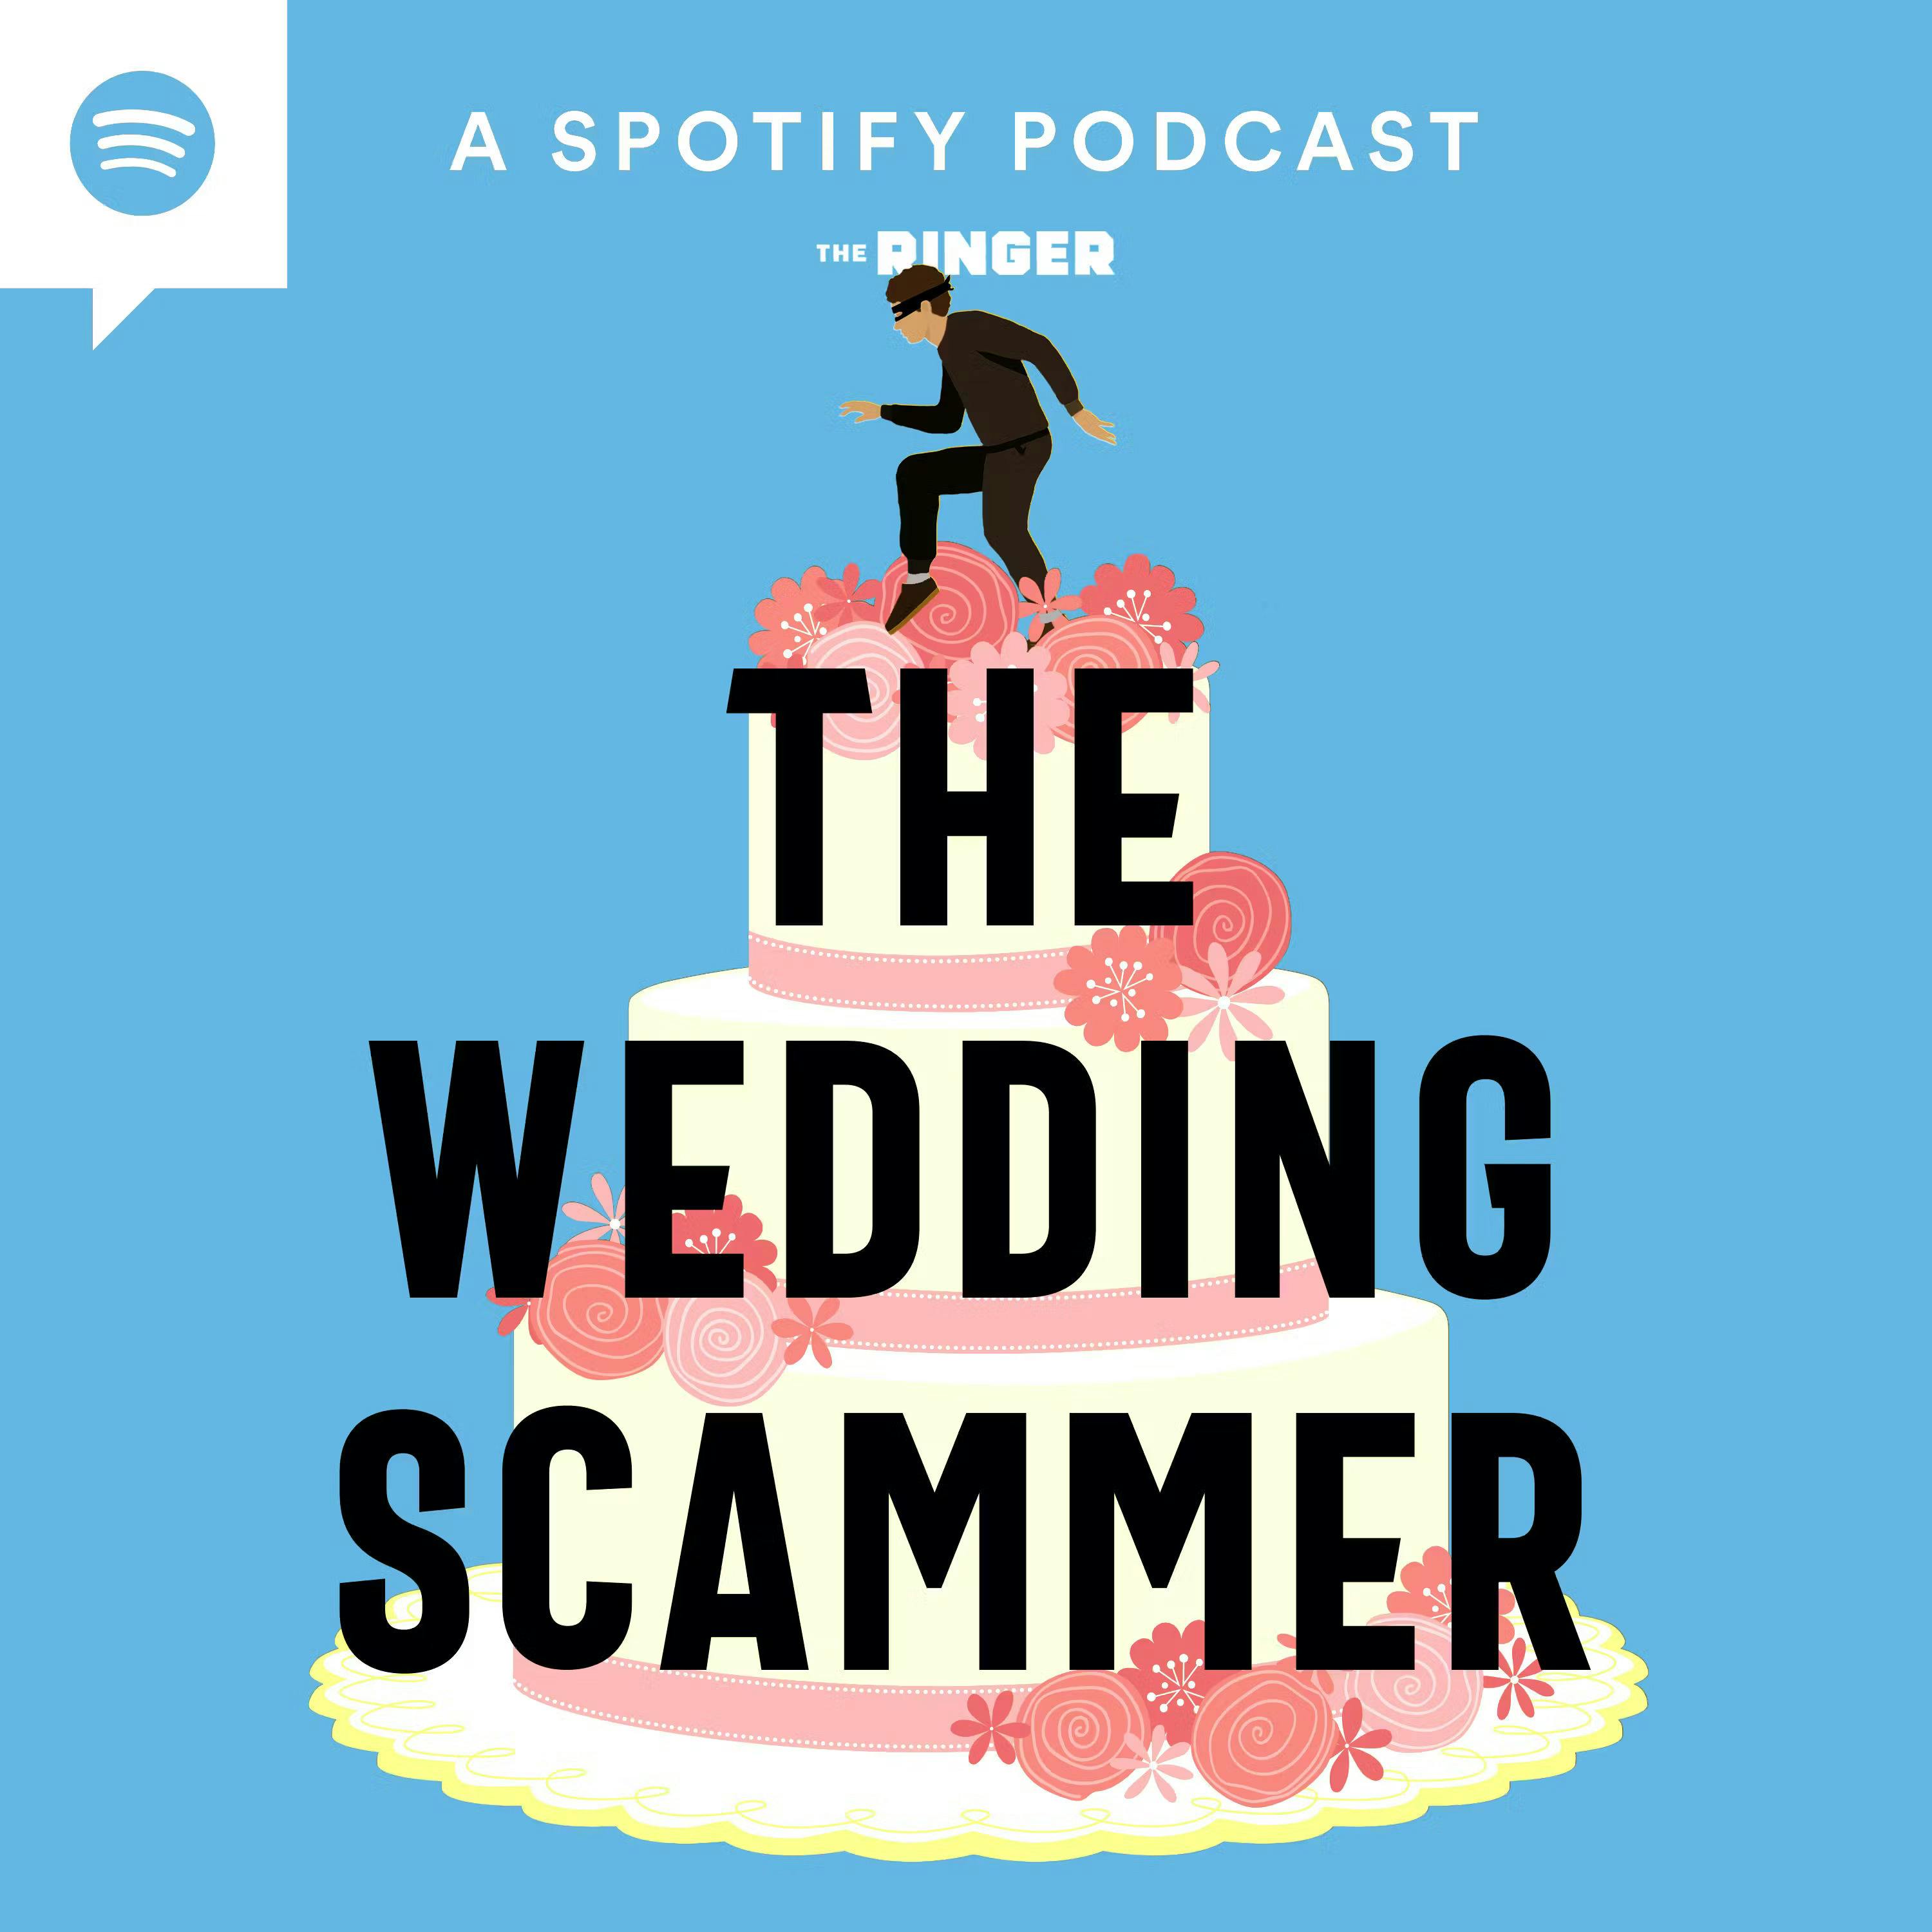 The Wedding Scammer